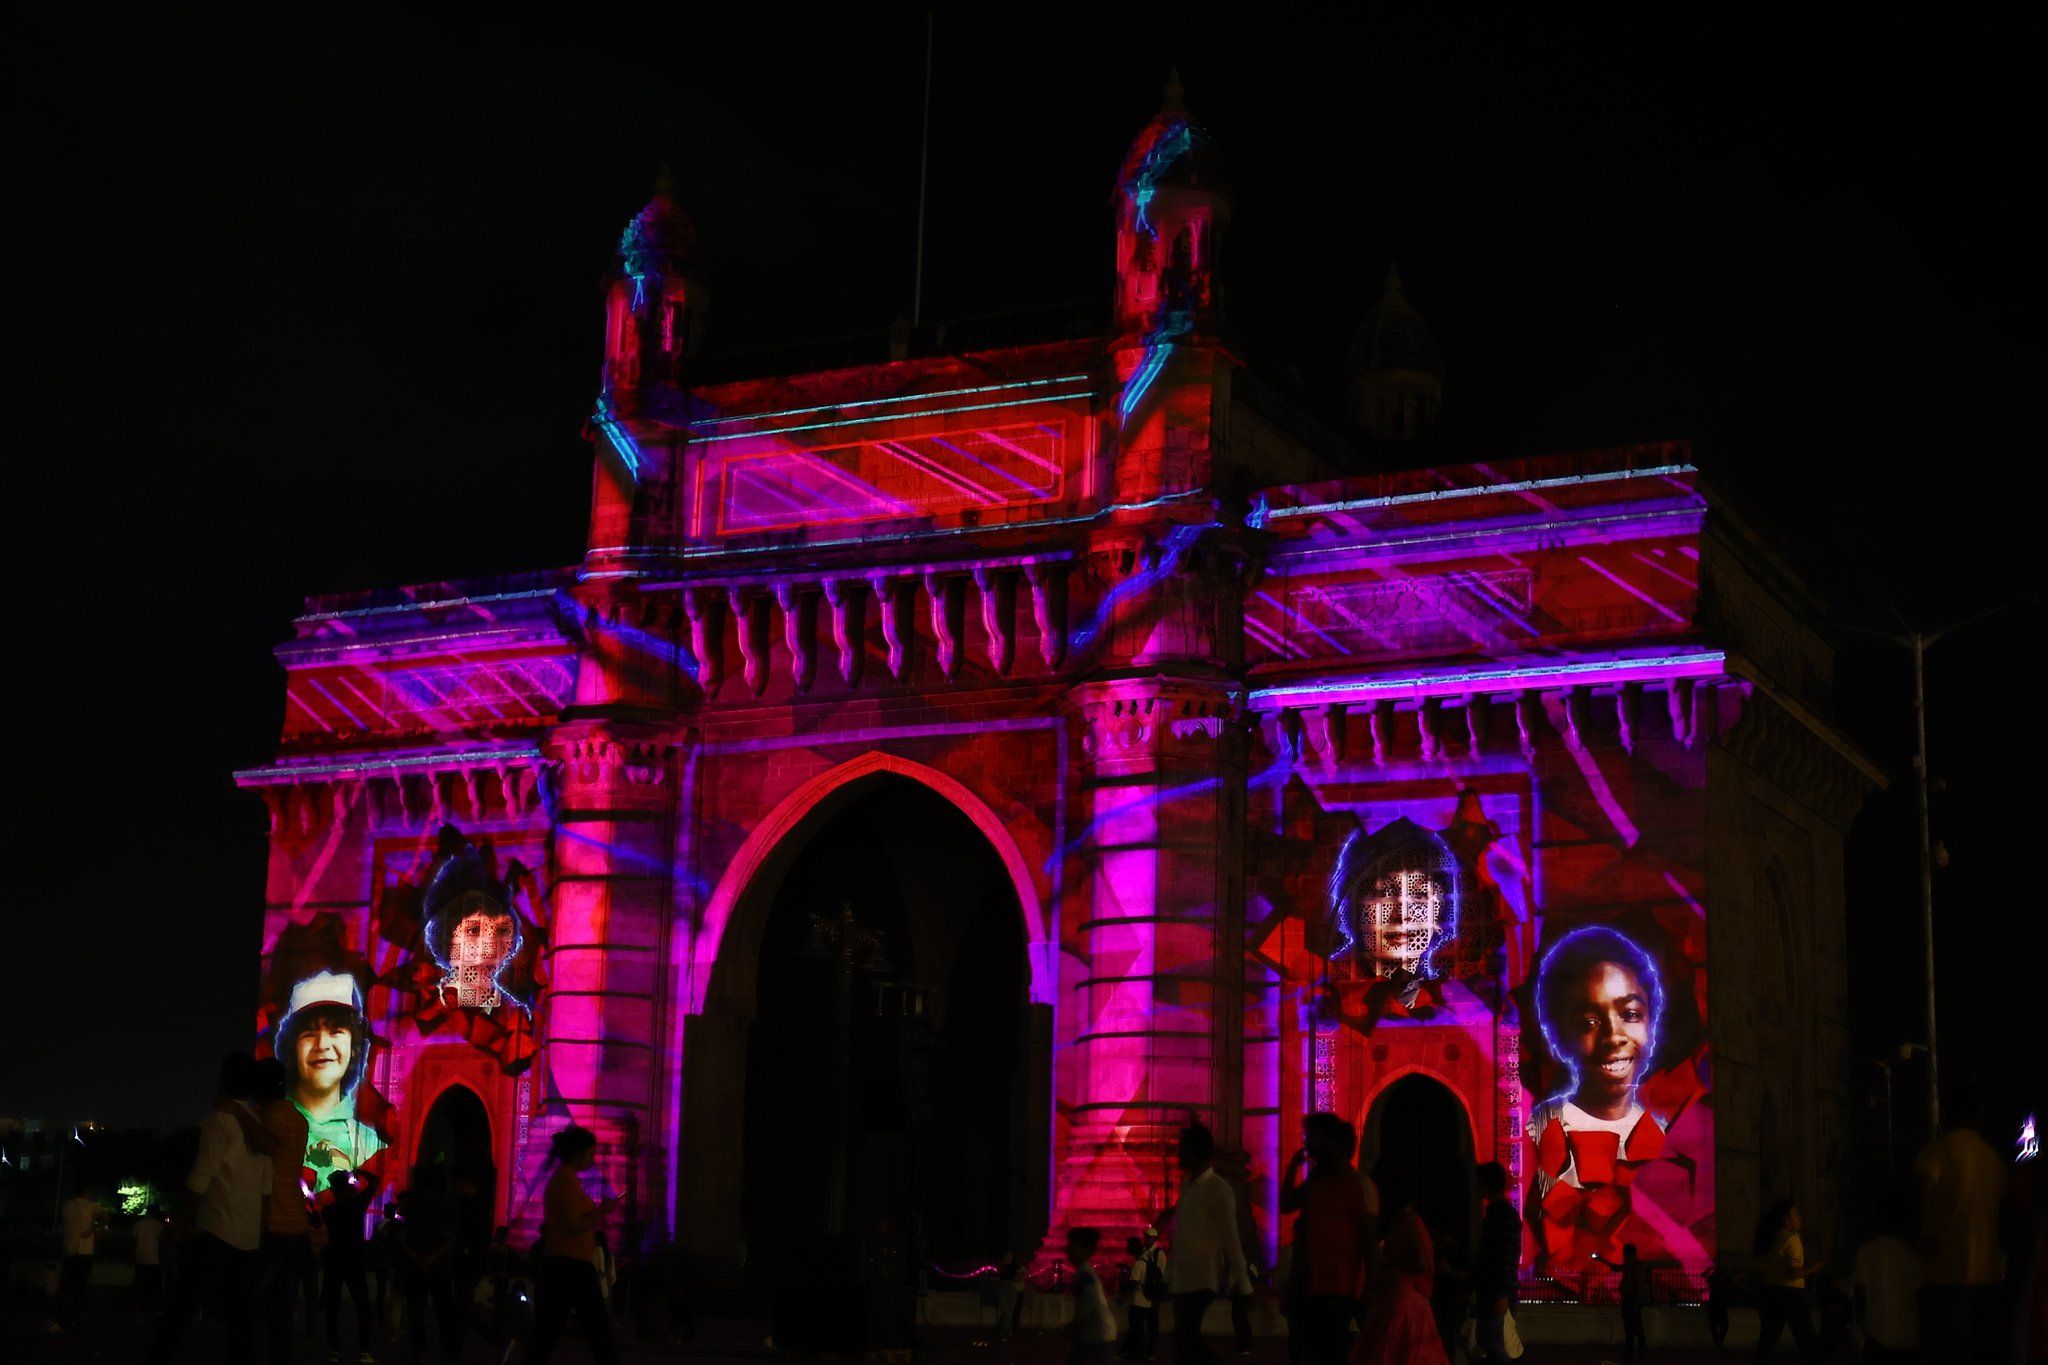 Stranger Things: Gateway of India celebrates the season release with lights